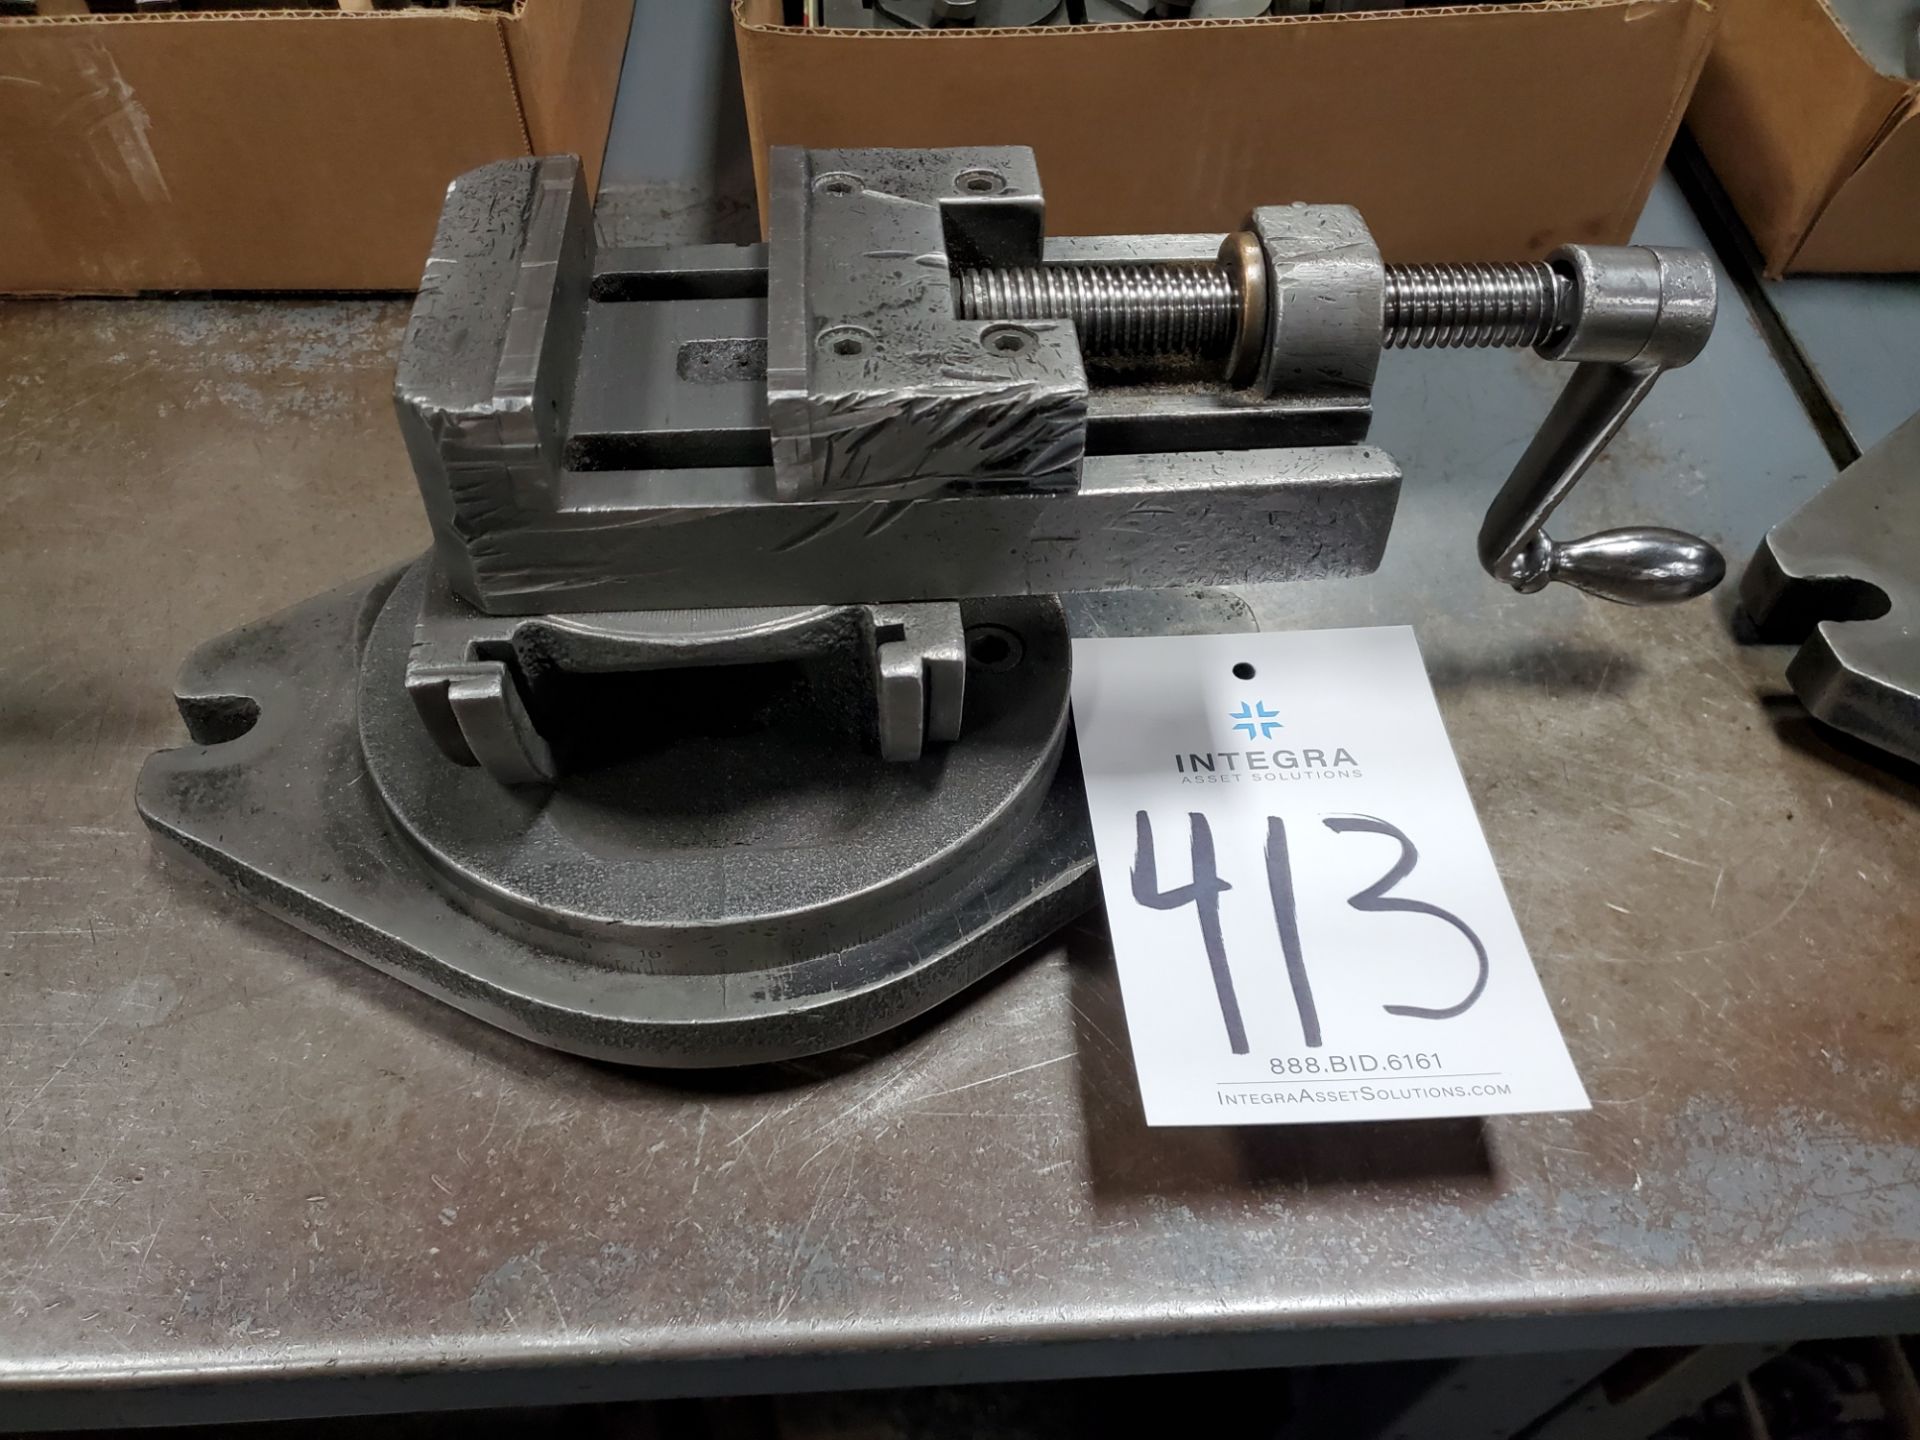 VR Wesson 4" Tiliting Machine Vise with Swivel Base